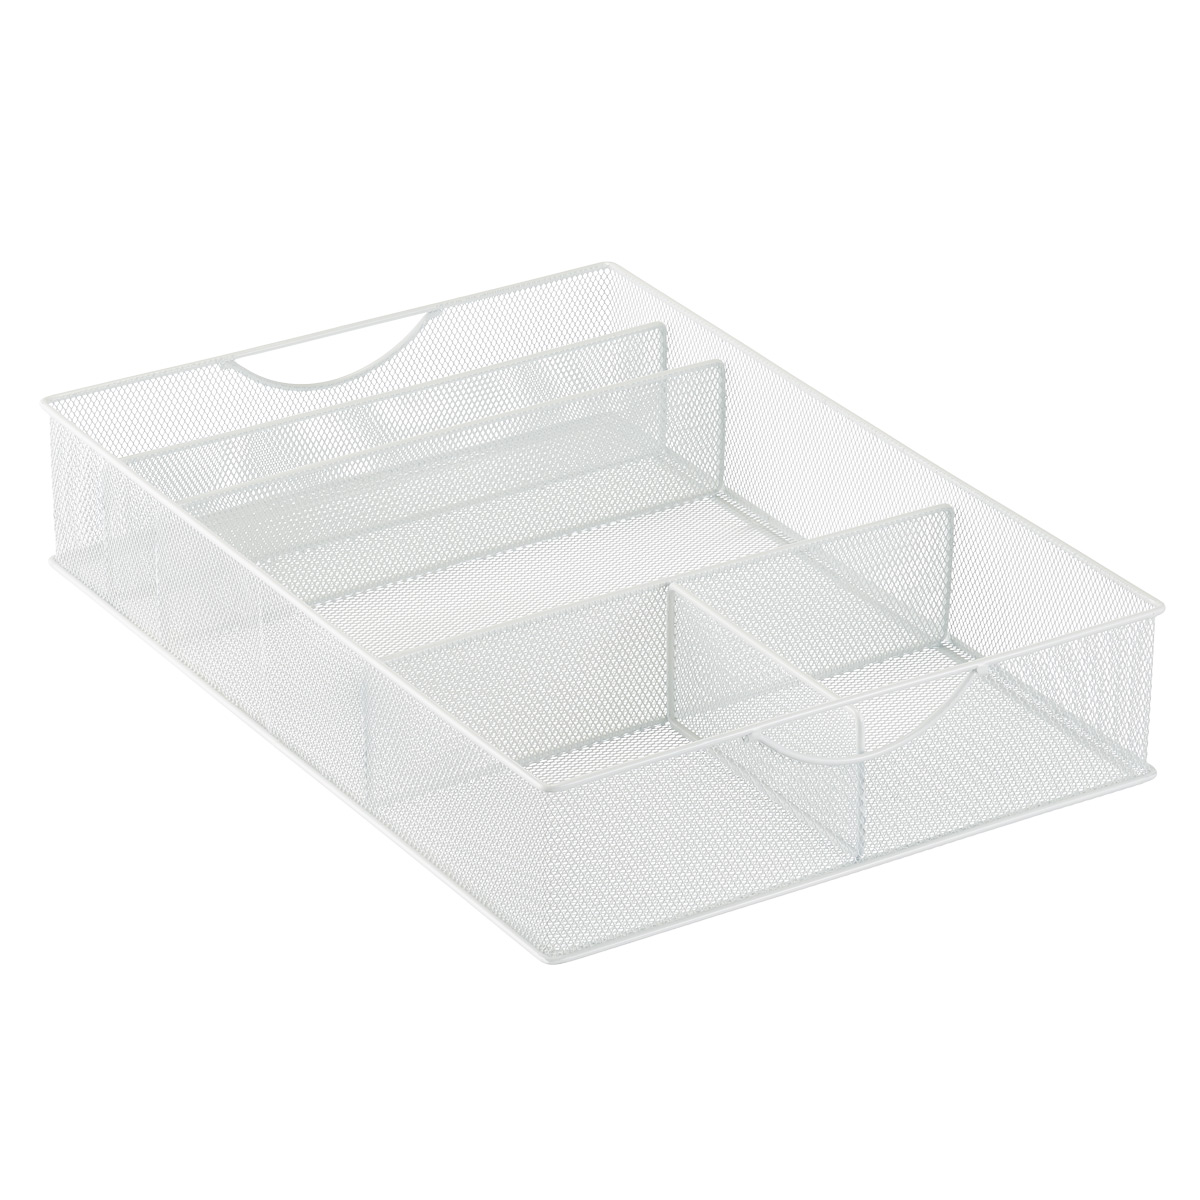 https://www.containerstore.com/catalogimages/417475/10042013_5-Section_Mesh_Food_Storage.jpg